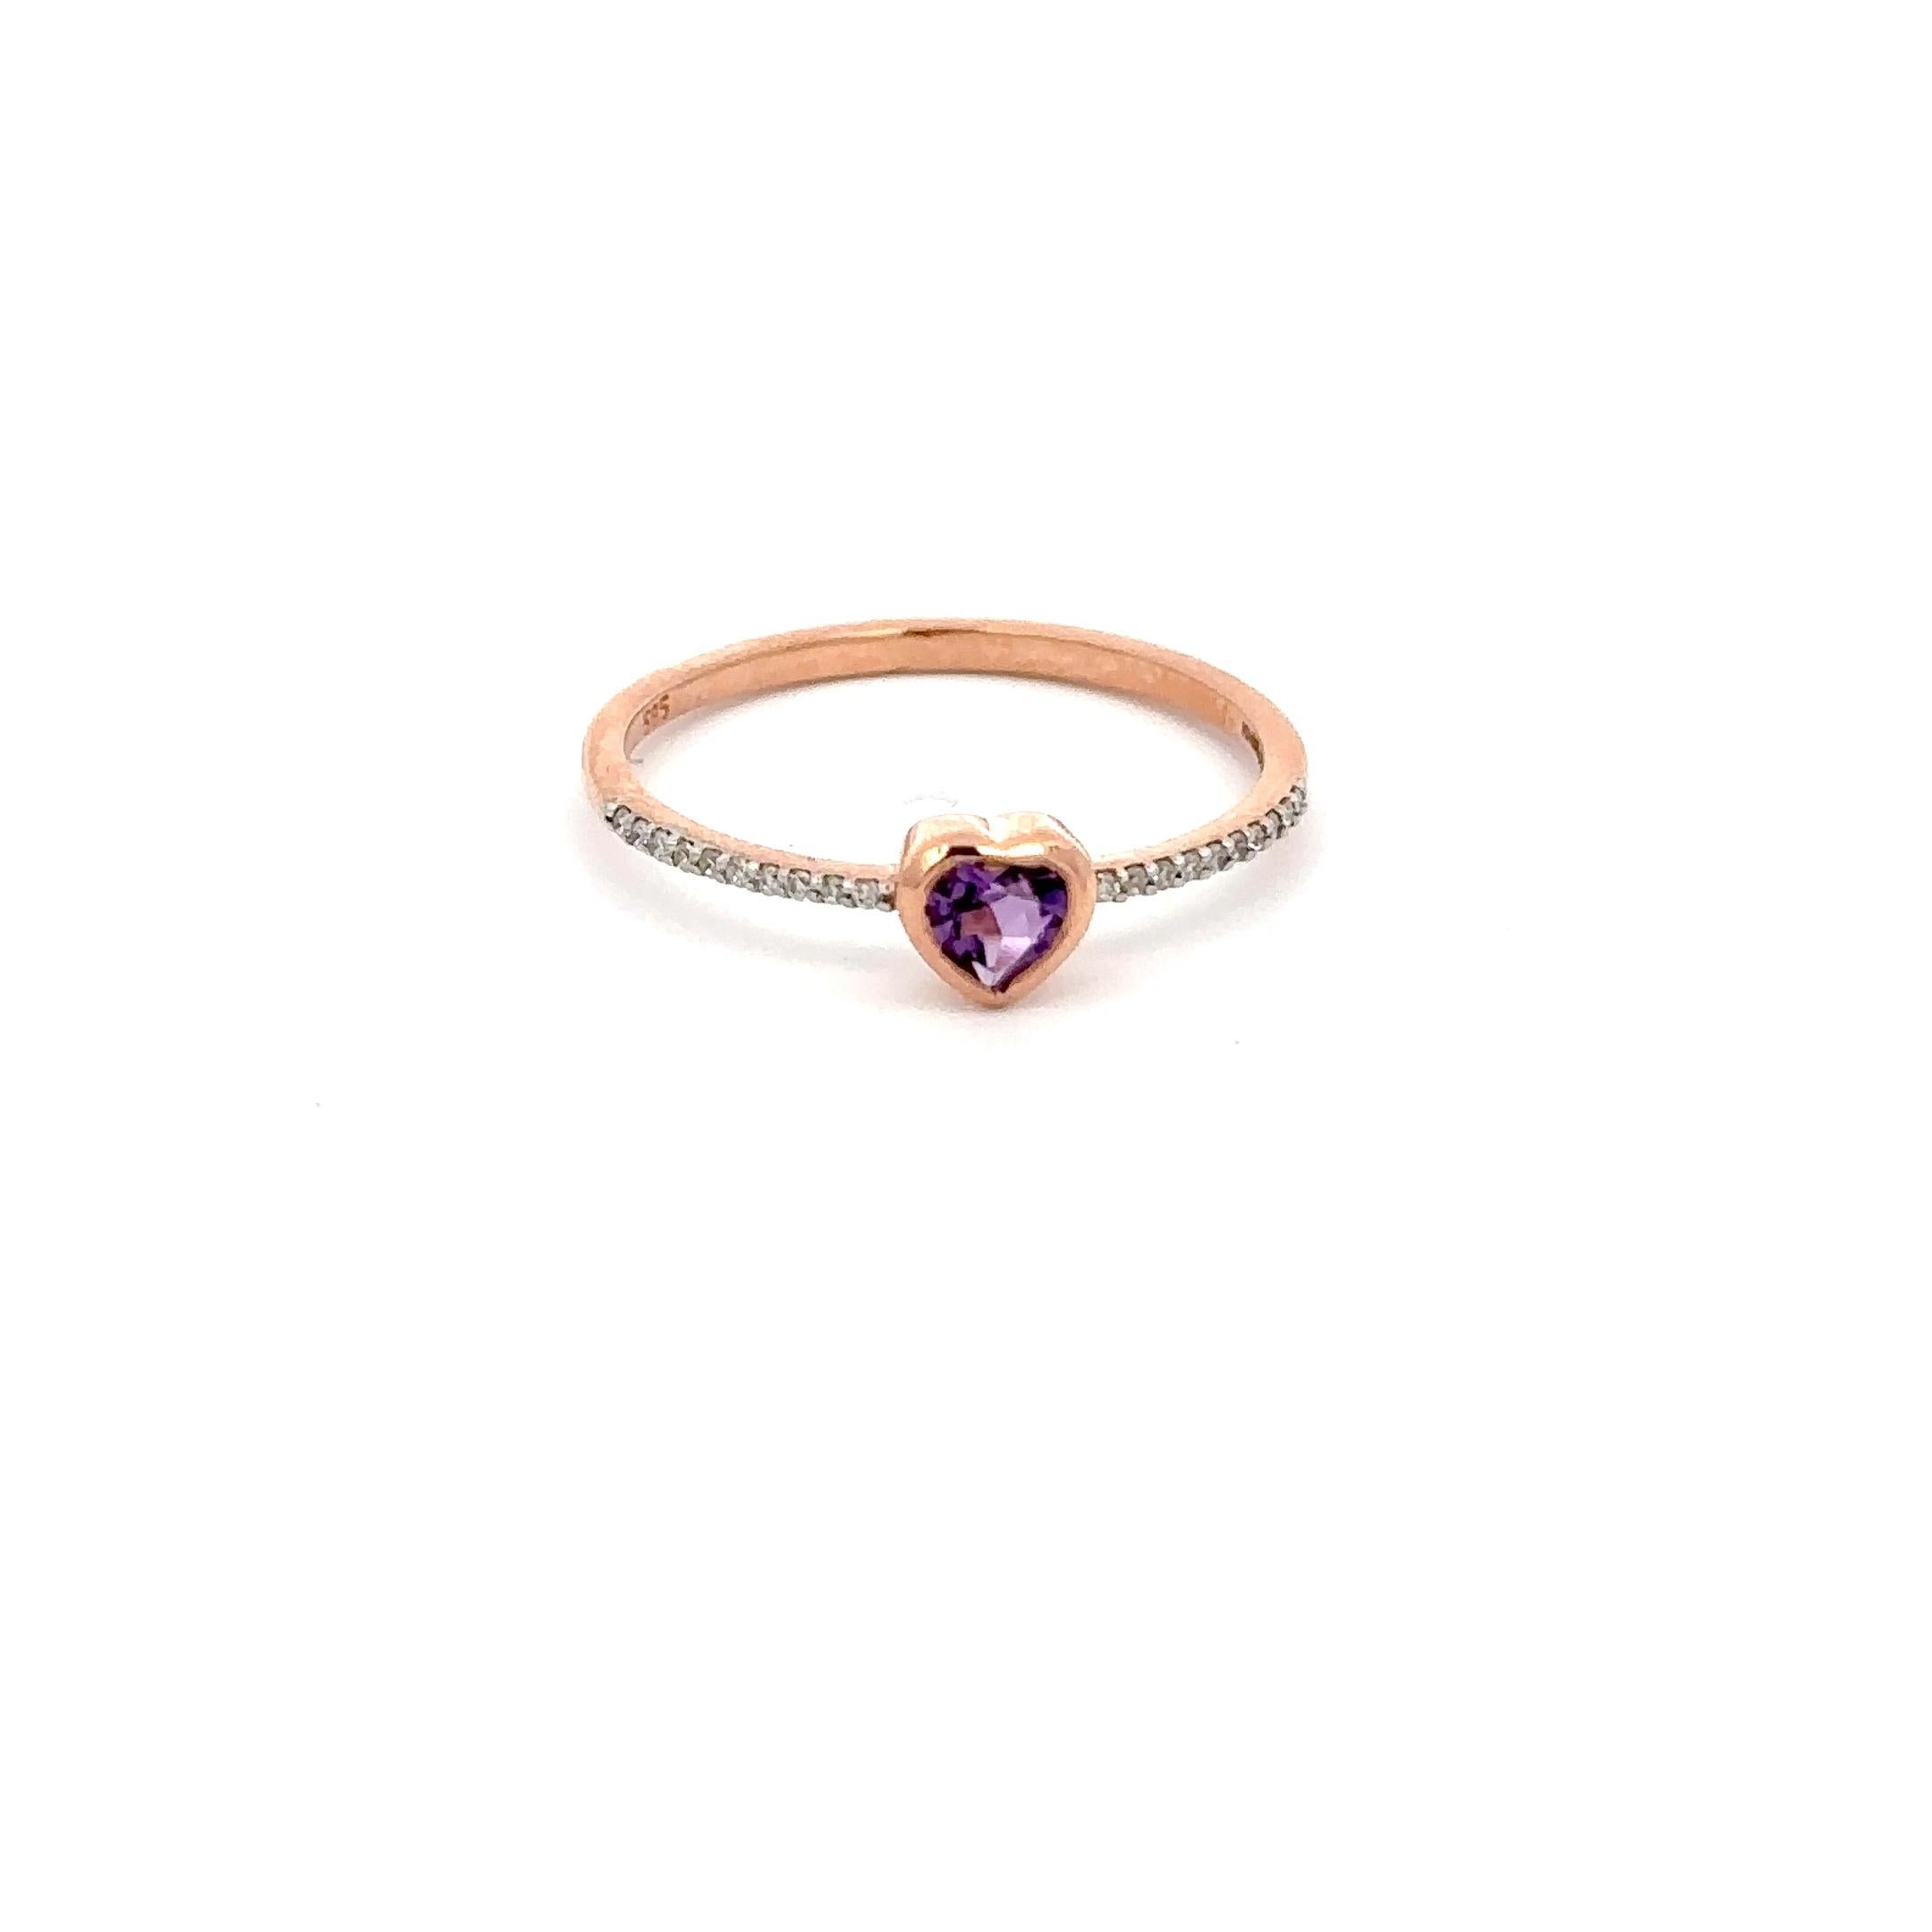 For Sale:  Dainty Heart Shaped Amethyst And Diamonds 14k Rose Gold Stackable Ring 17